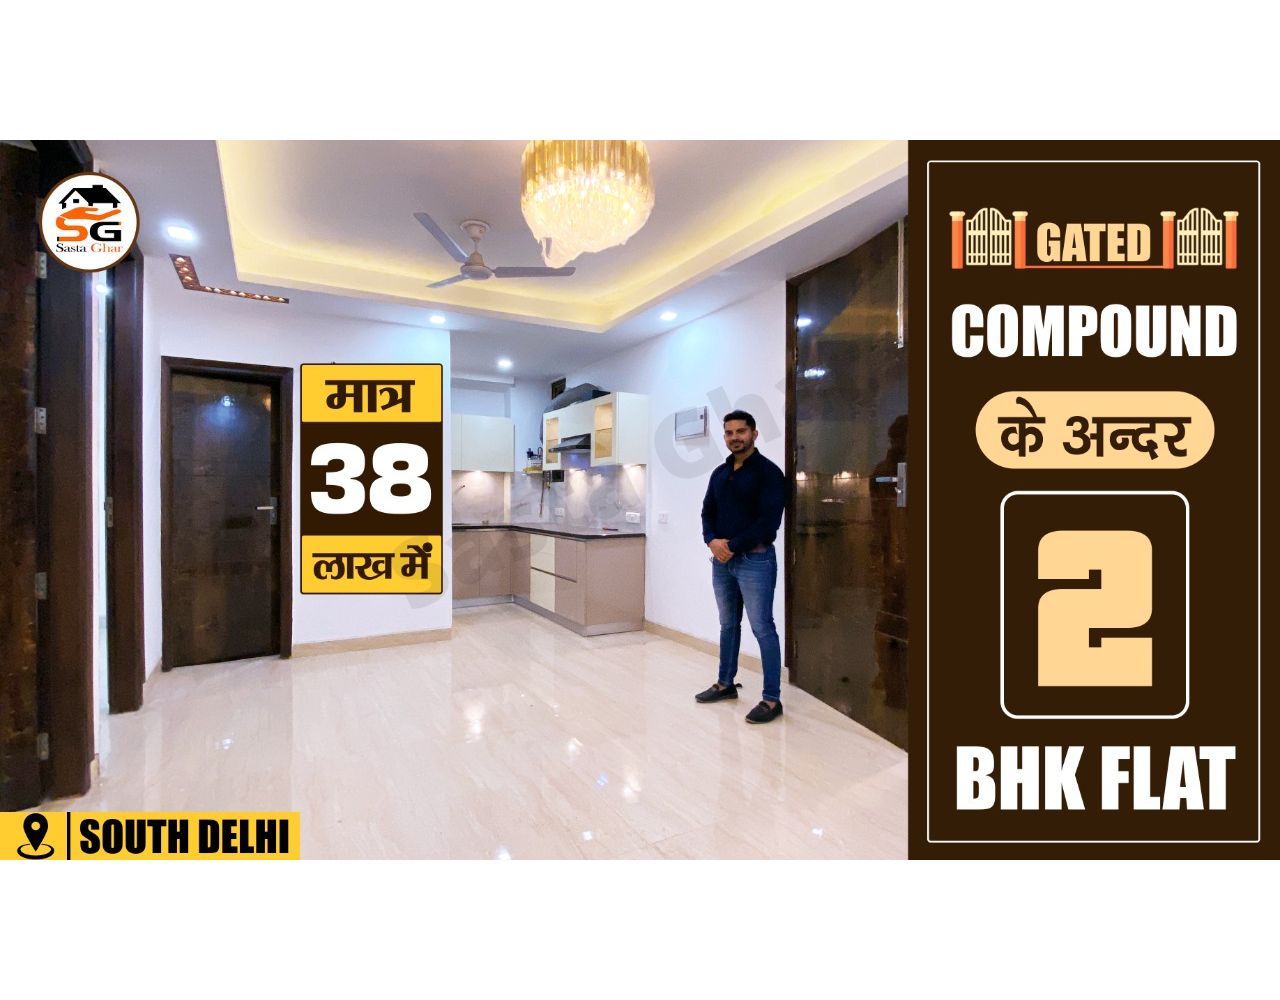 2 BHK flat in Delhi for sale